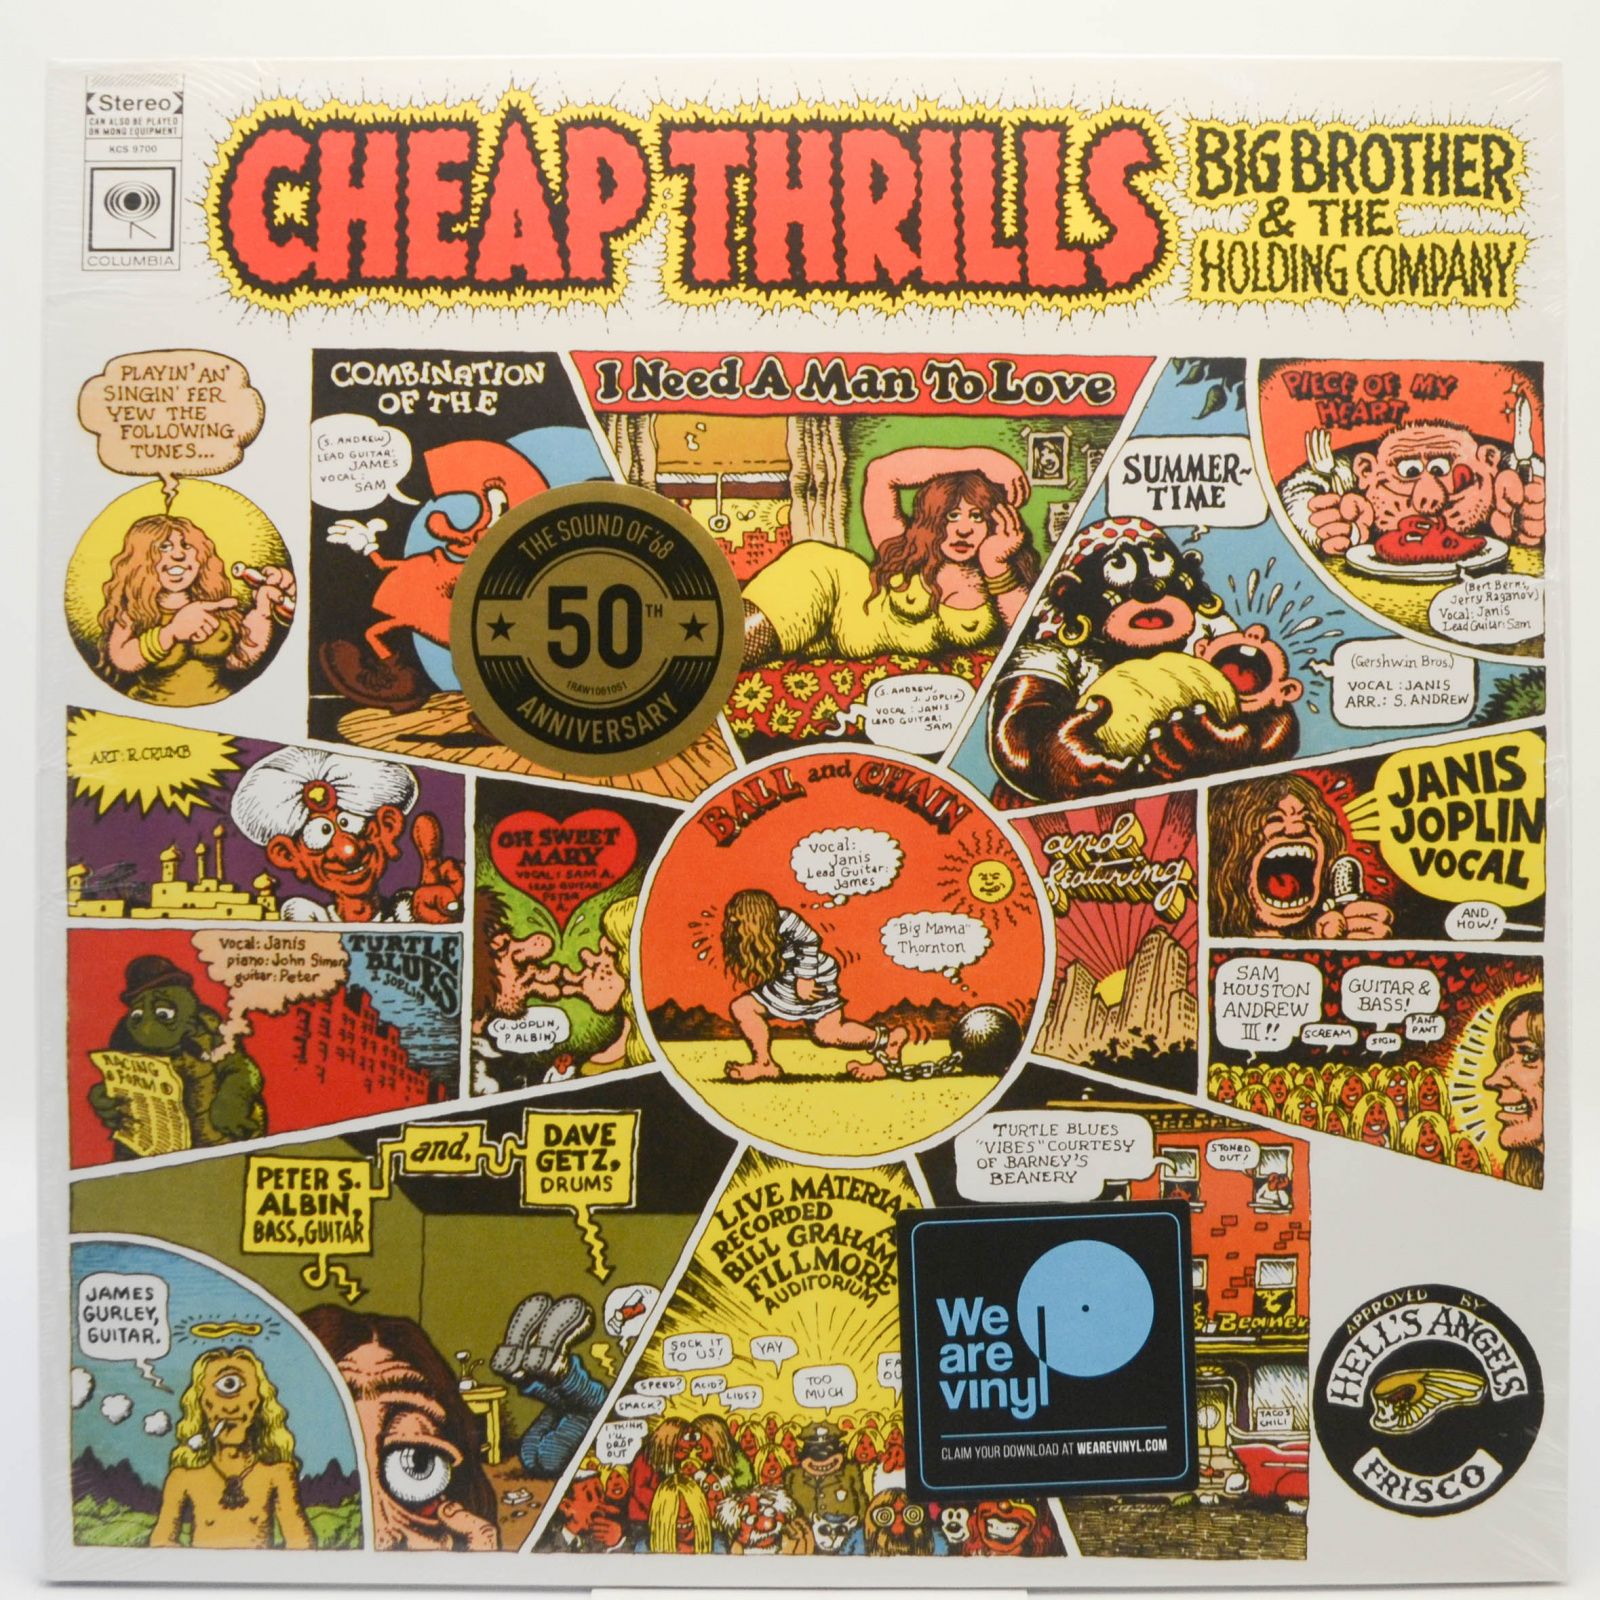 Big Brother & The Holding Company — Cheap Thrills, 1968